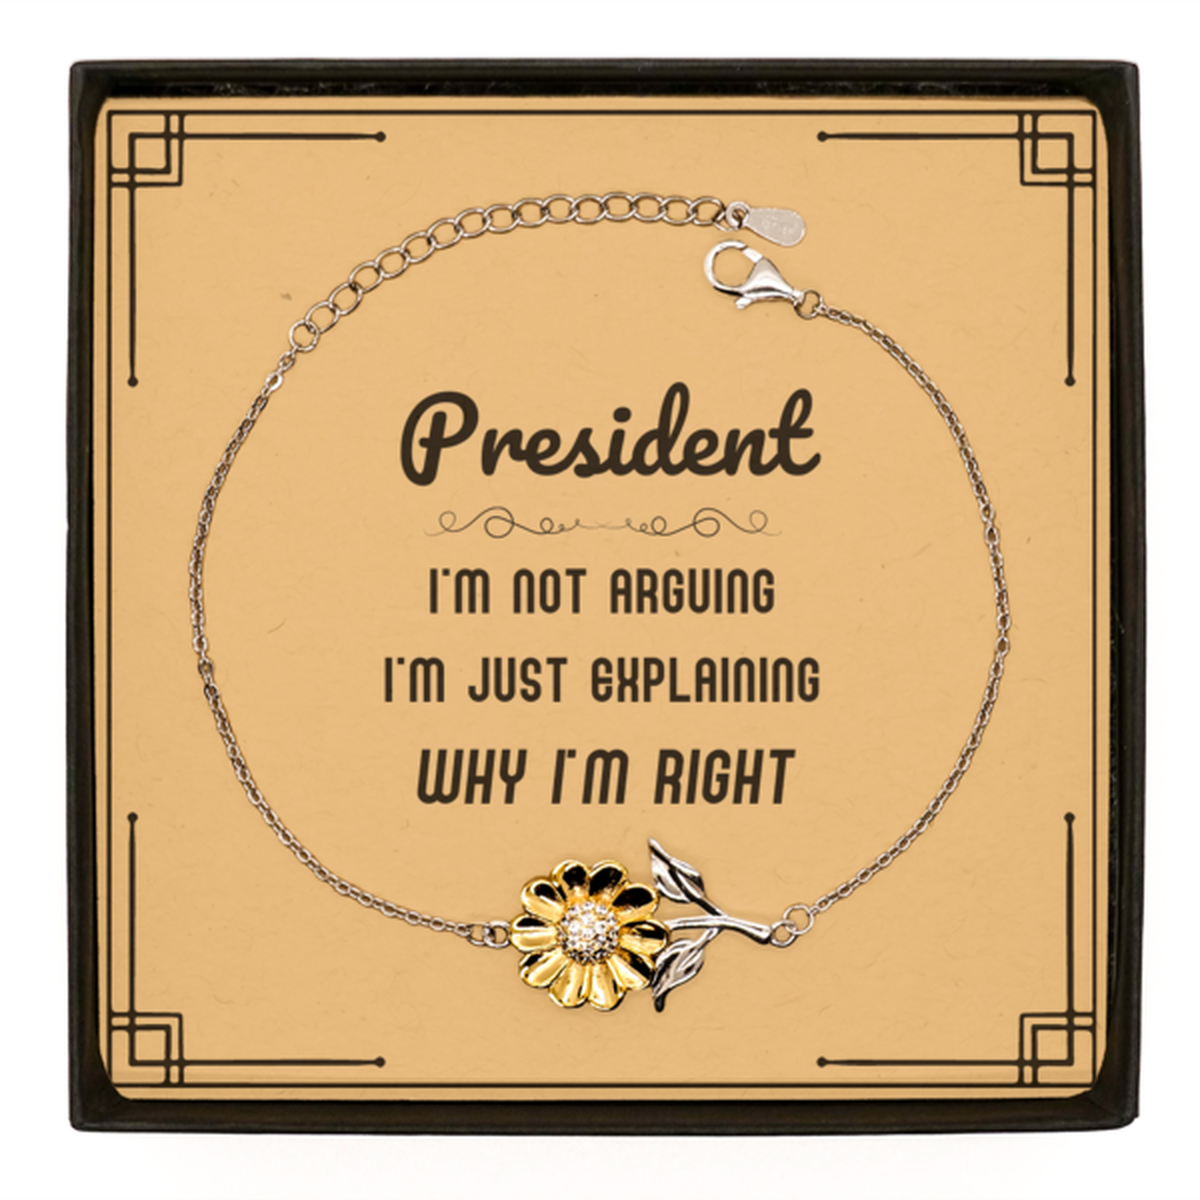 President I'm not Arguing. I'm Just Explaining Why I'm RIGHT Sunflower Bracelet, Funny Saying Quote President Gifts For President Message Card Graduation Birthday Christmas Gifts for Men Women Coworker